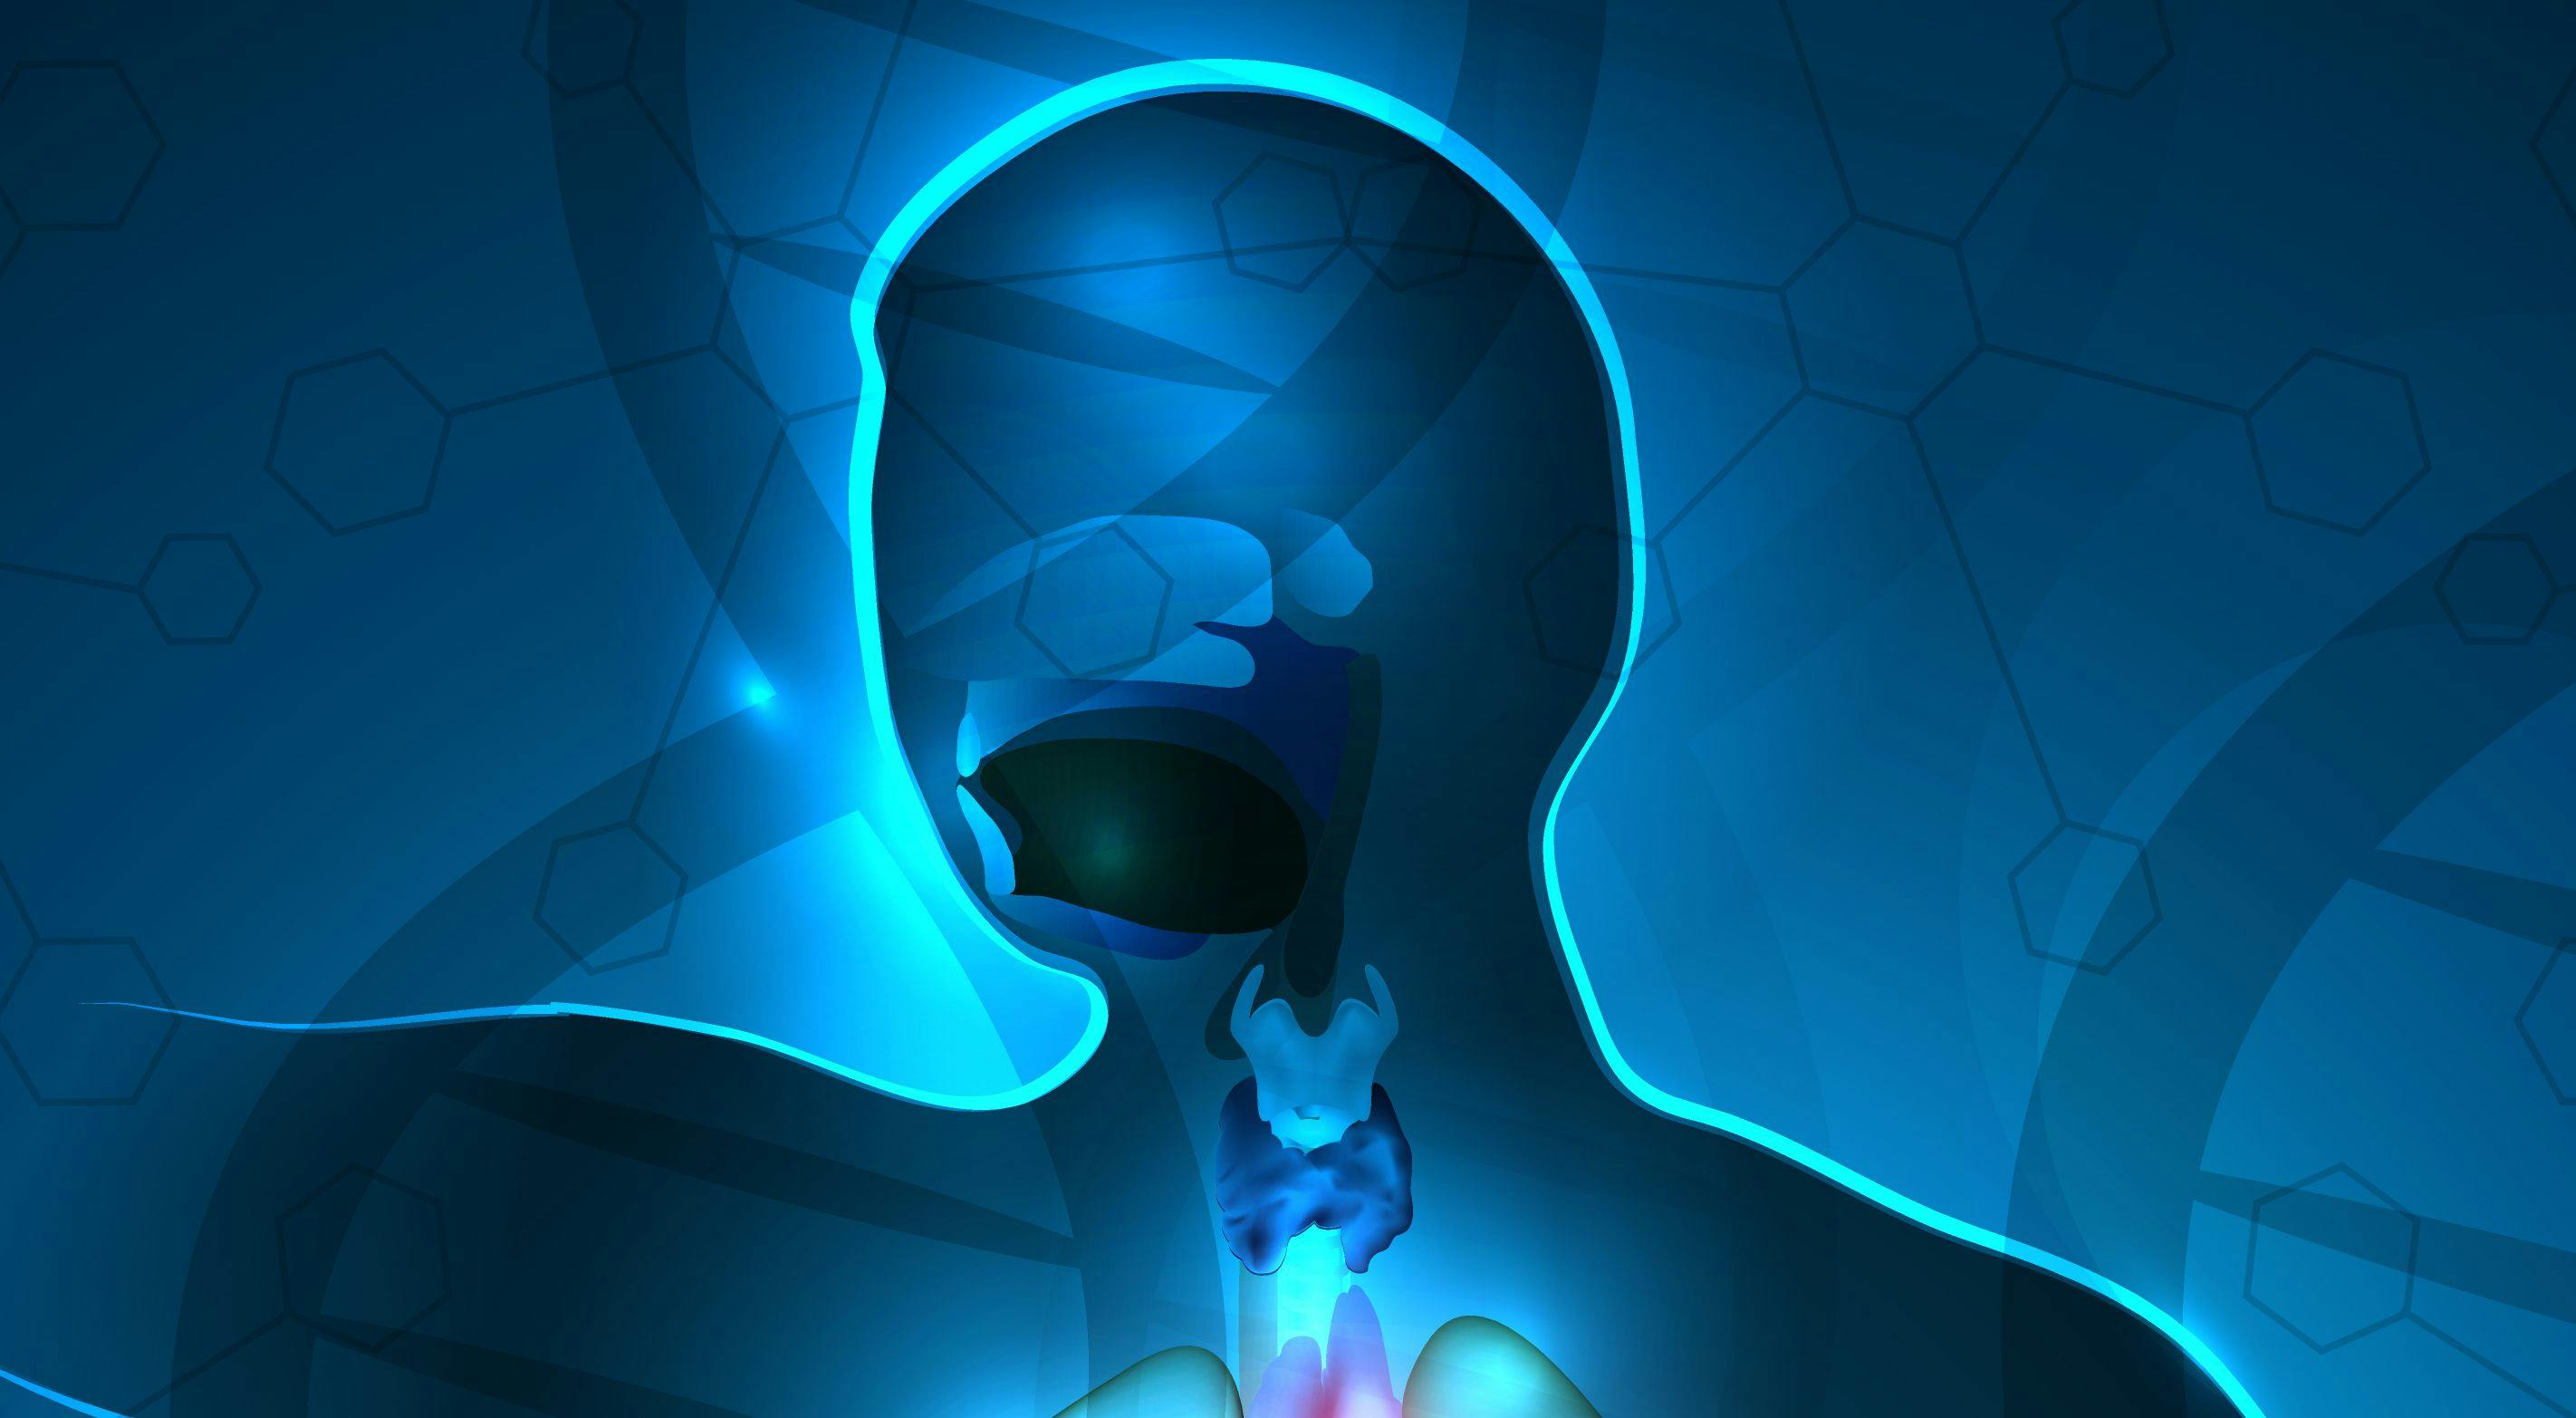 Patients With Head and Neck Cancer Could See Benefit from Investigational Therapy